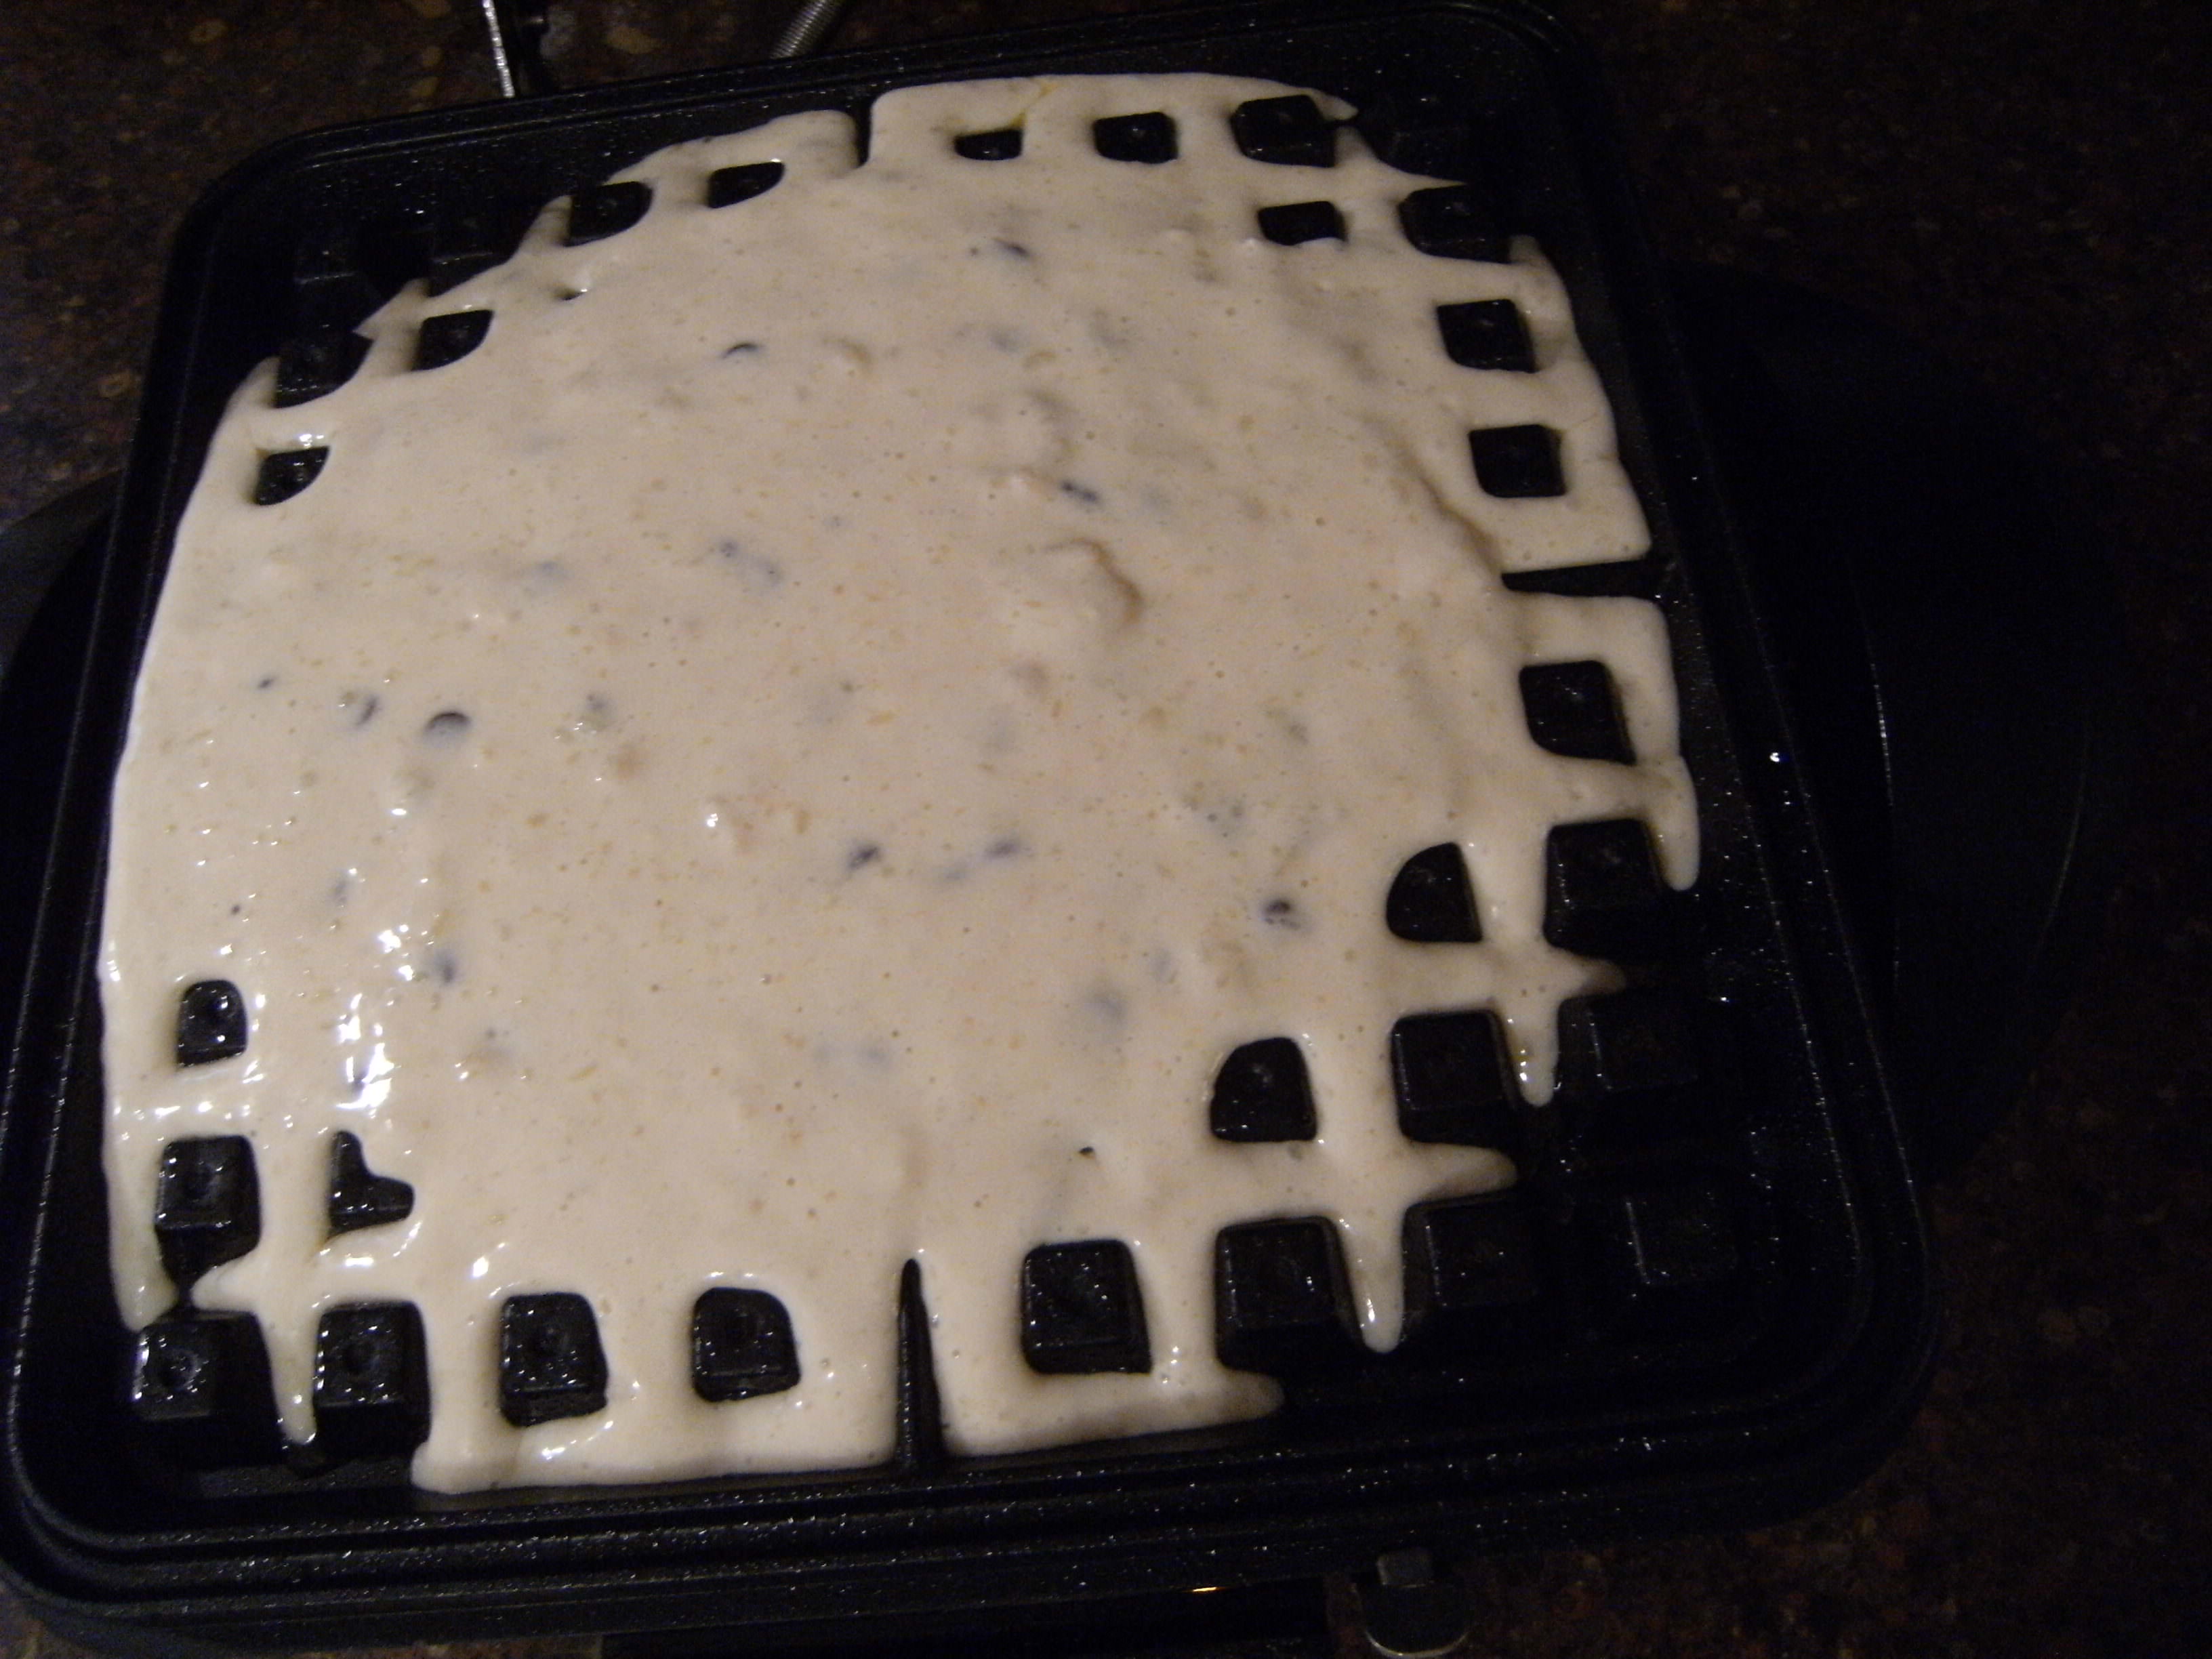 uncooked waffle batter